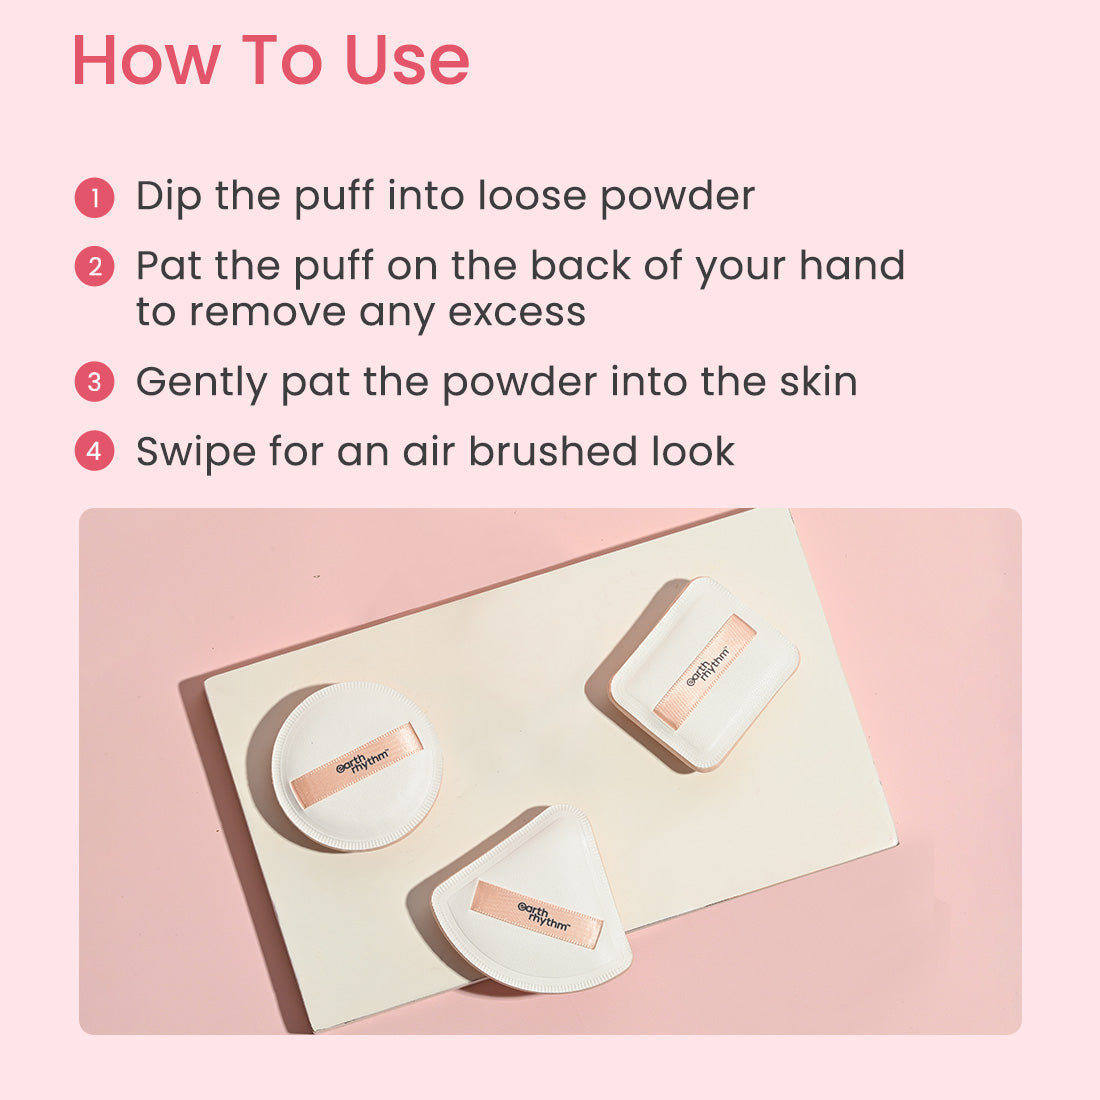 How to use makeup puff